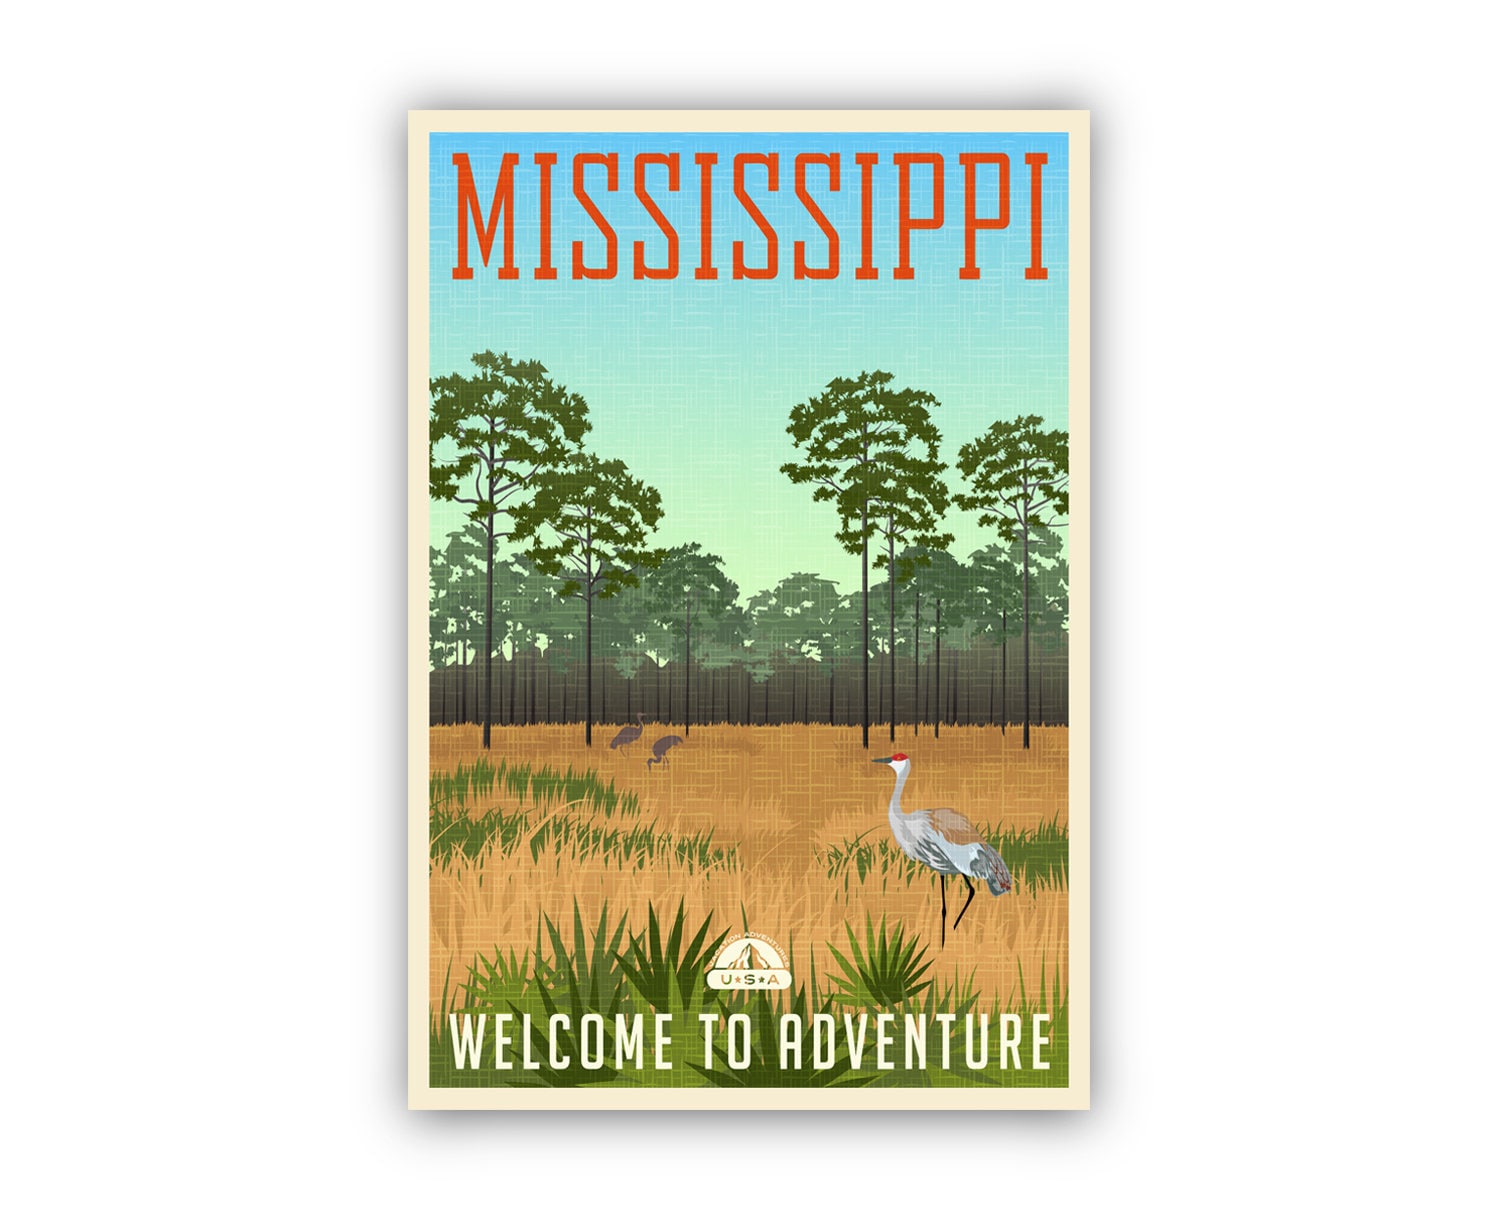 Retro Style Travel Poster, Mississippi vintage rustic poster print, Home wall art, Office wall decoration, Mississippi state map poster